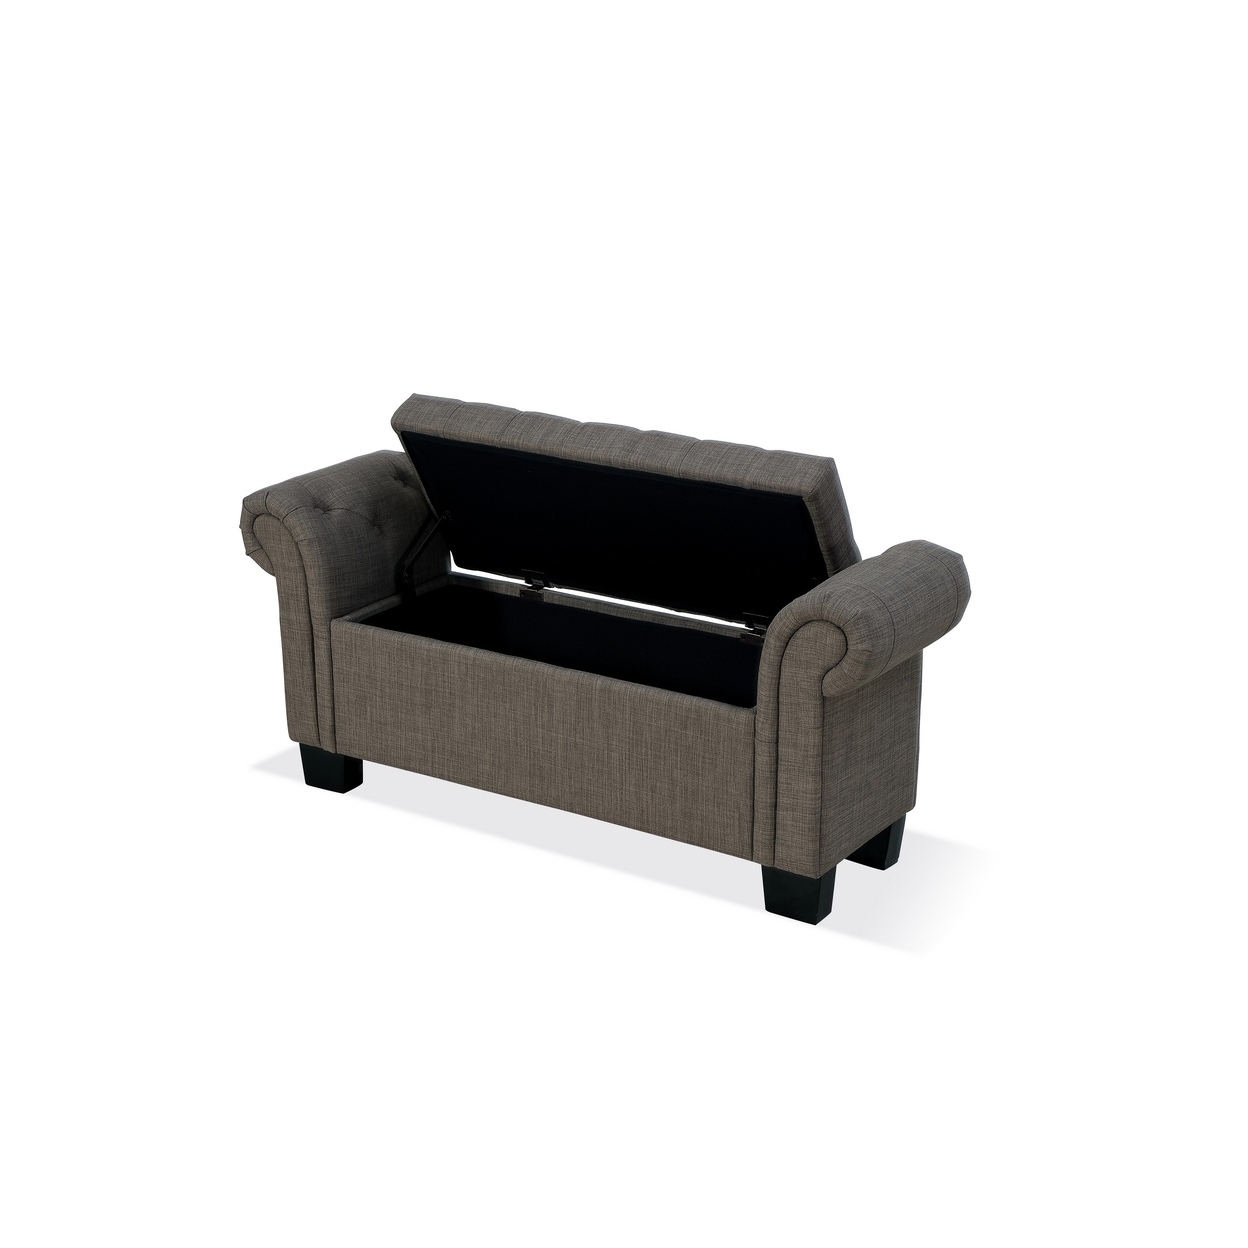 54 Inch Storage Bench, Polyester Linen, Rolled Arms, Tufted, Smooth Gray- Saltoro Sherpi